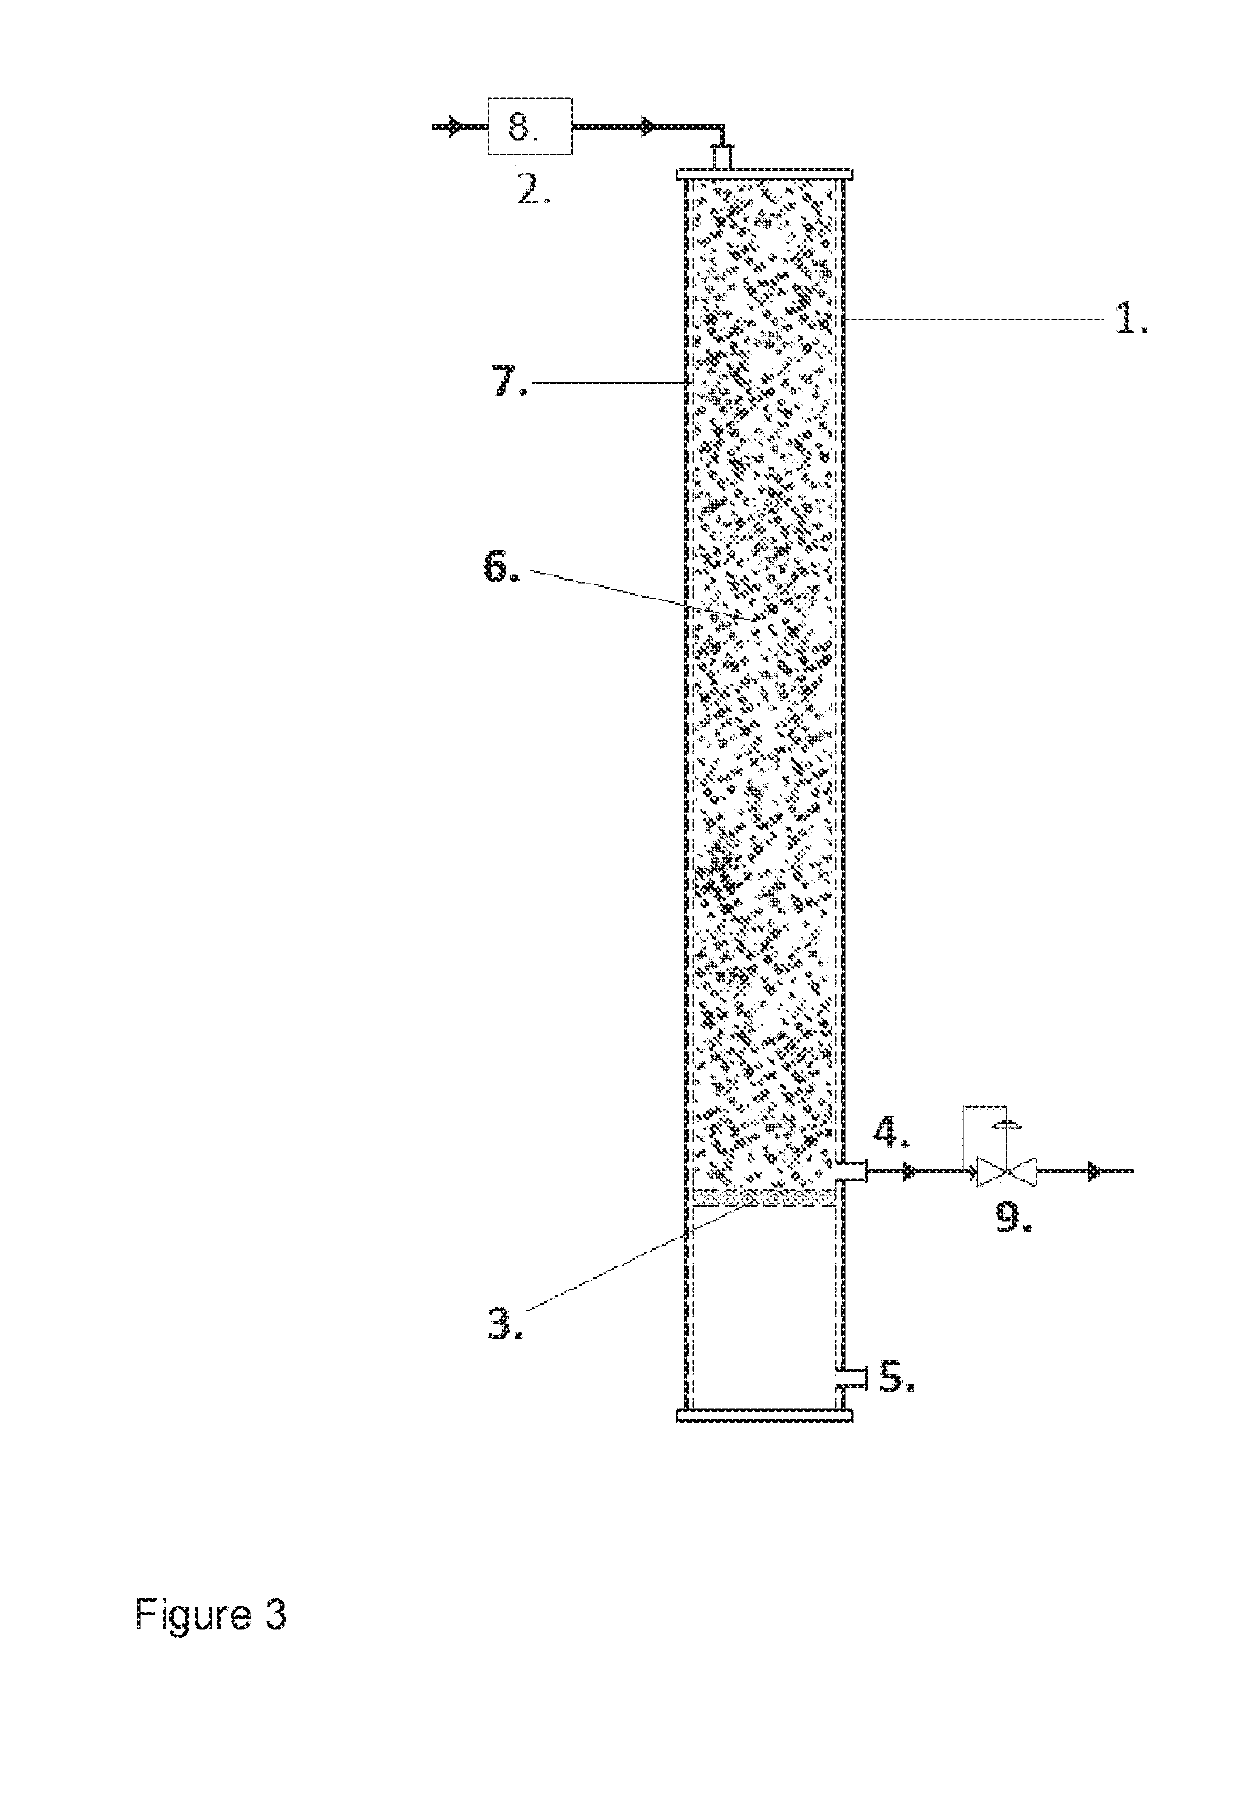 Solid state fermentation reactor equipped with active support material